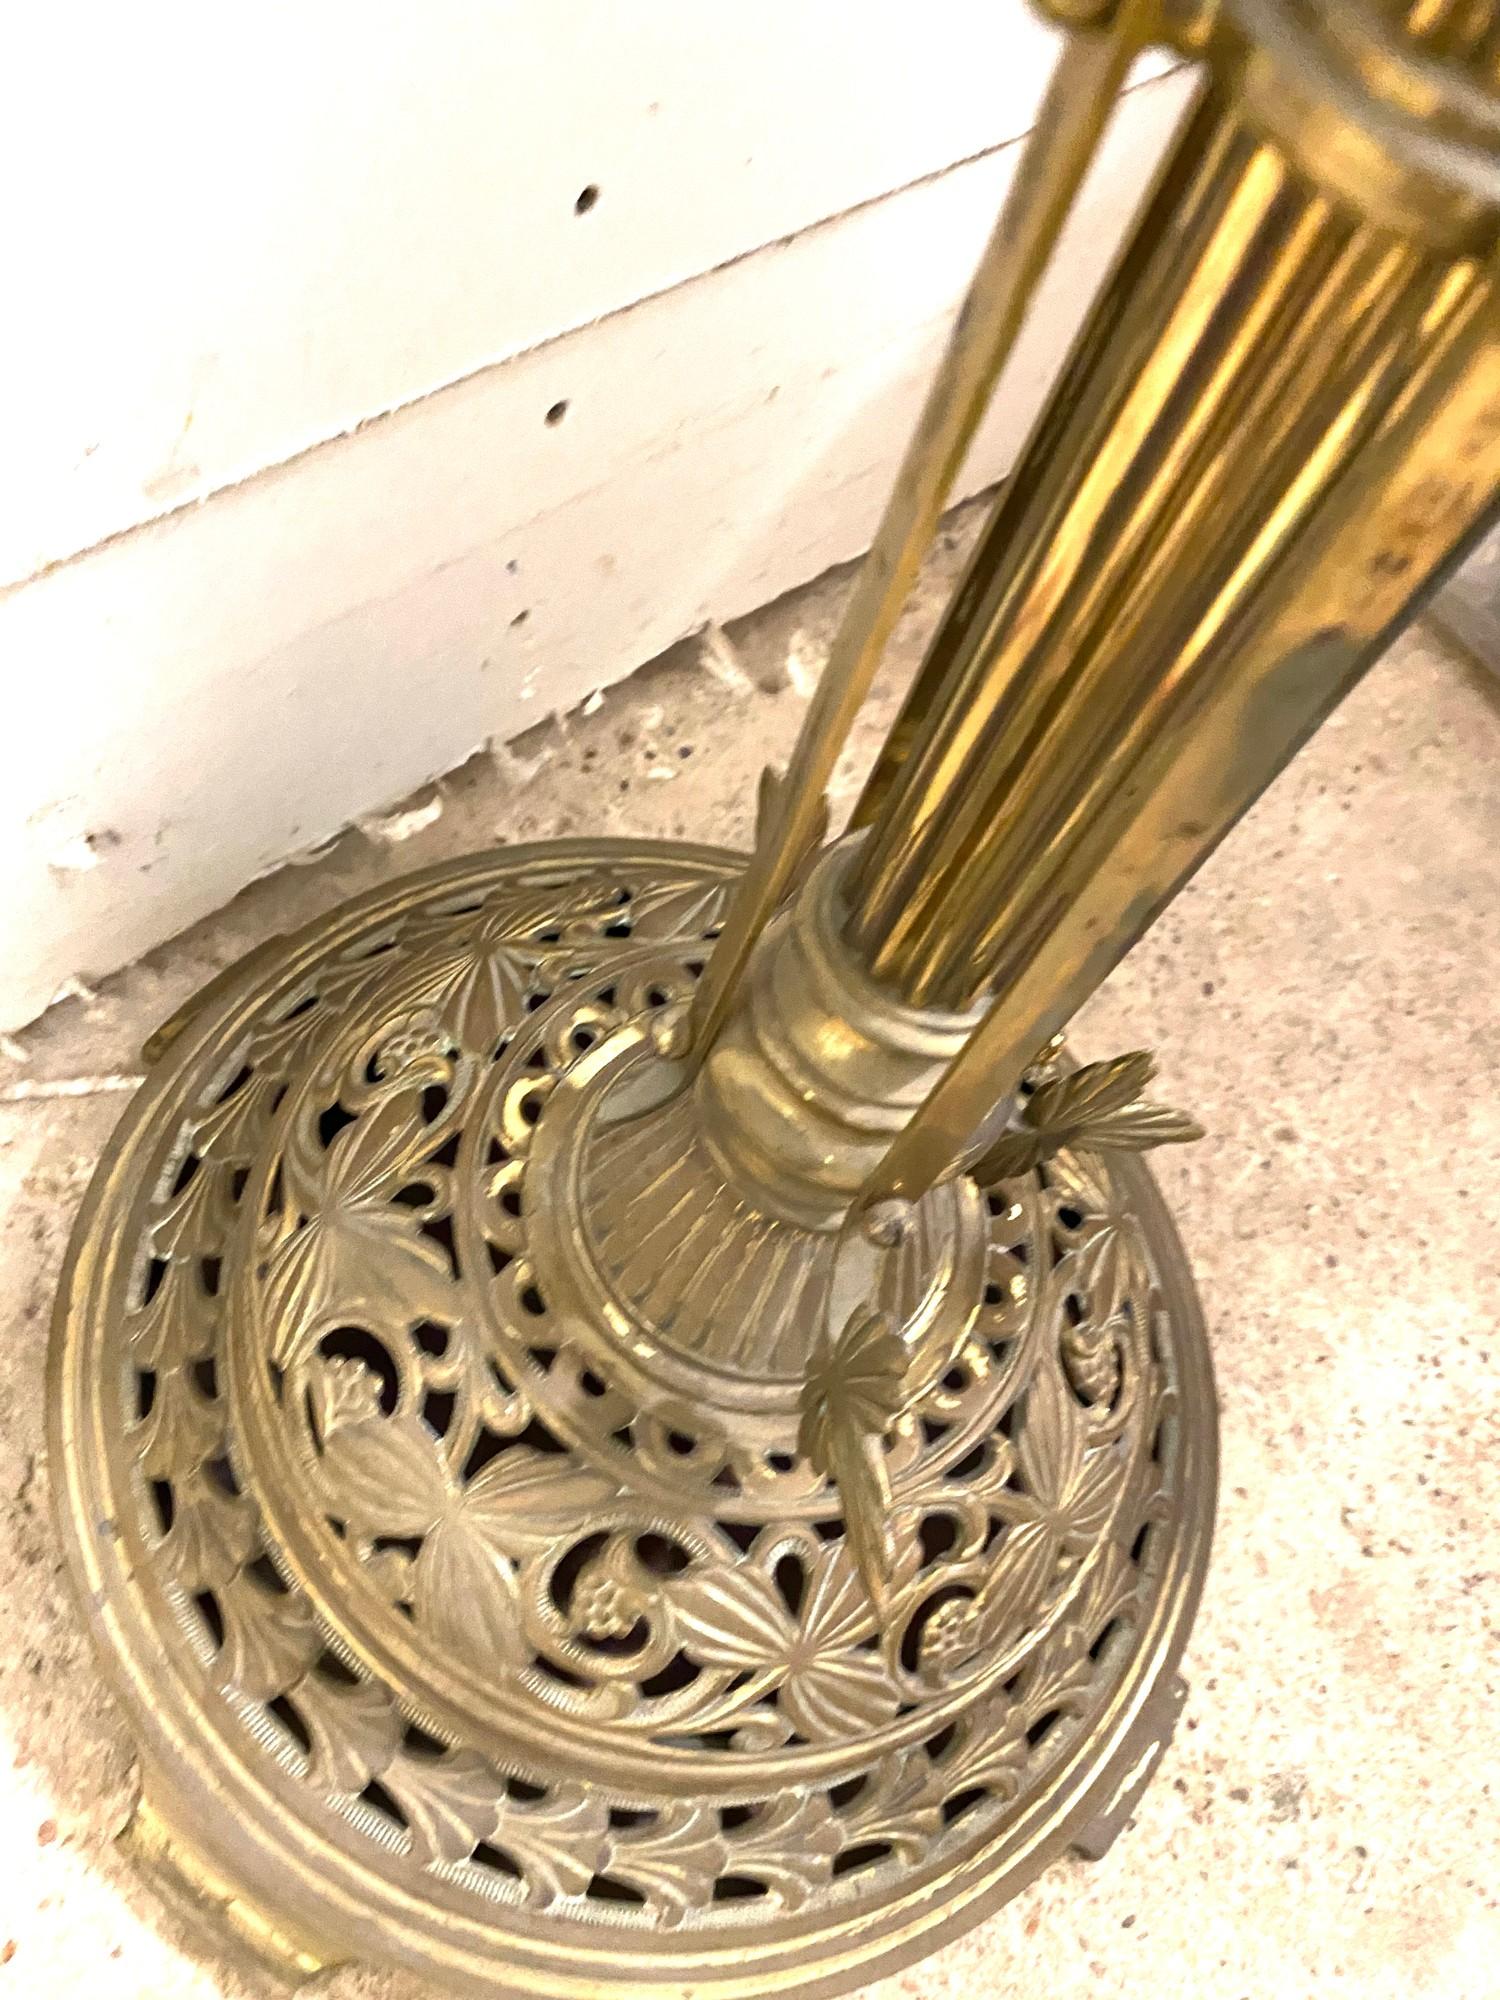 Victorian ornate telescopic oil lamp converted to electric, untested, some damage please view images - Image 4 of 9